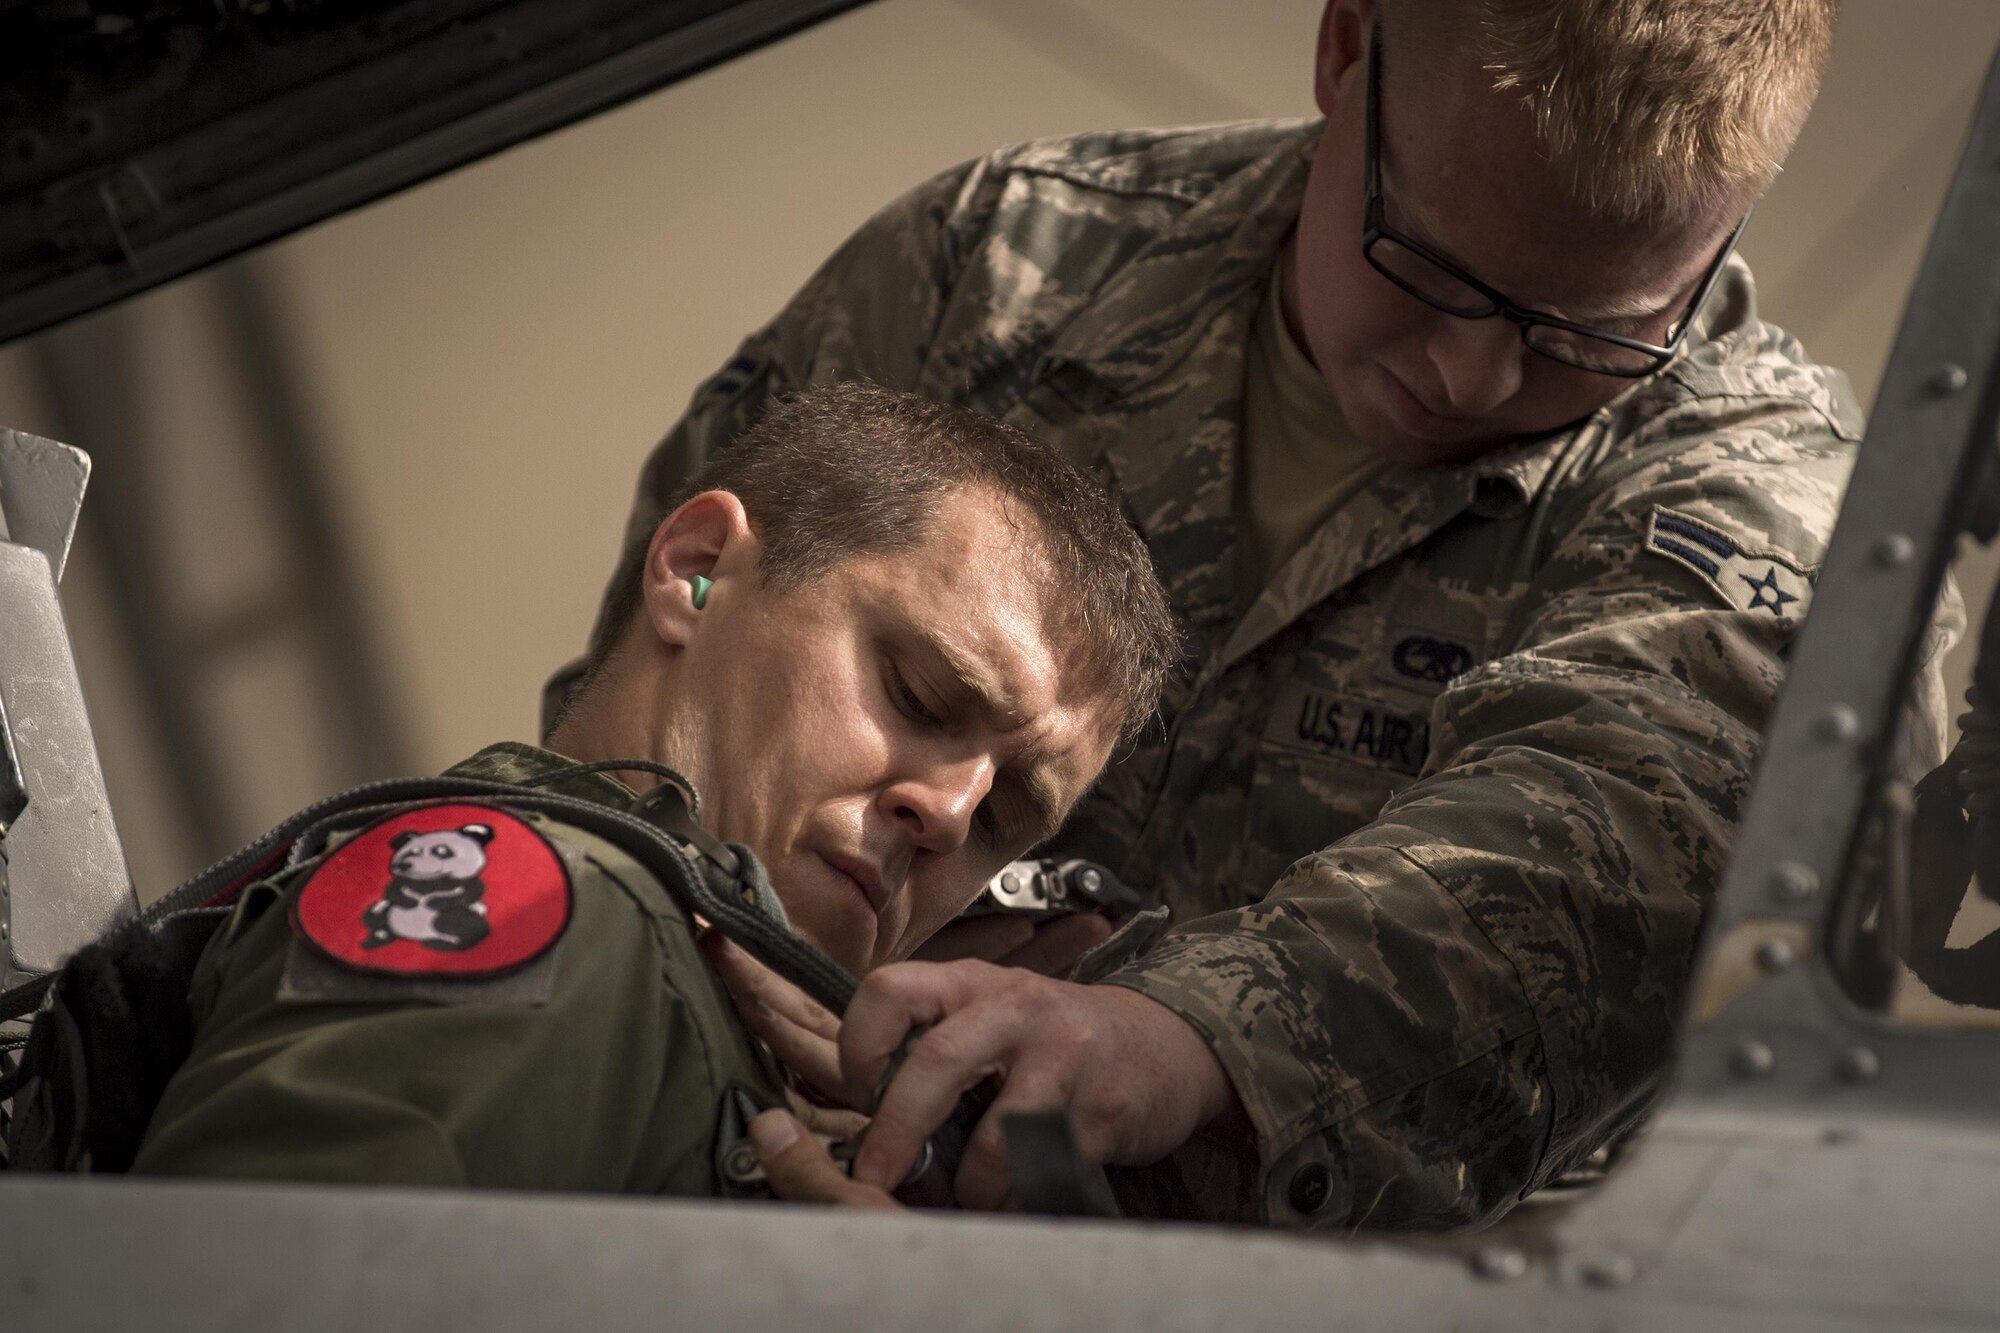 A crew chief with the 75th Aircraft Maintenance Unit helps Capt. Joseph Morrin, 75th Fighter Squadron A-10C Thunderbolt II pilot, with his safety harness prior to take off, April 28, 2017, at Moody Air Force Base, Ga. The 75th FS departed for Combat Hammer, an air-to-ground exercise hosted at Hill Air Force Base, Utah. The exercise is designed to collect and analyze data on the performance of precision weapons and measure their suitability for use in combat. (U.S. Air Force photo by Andrea Jenkins)